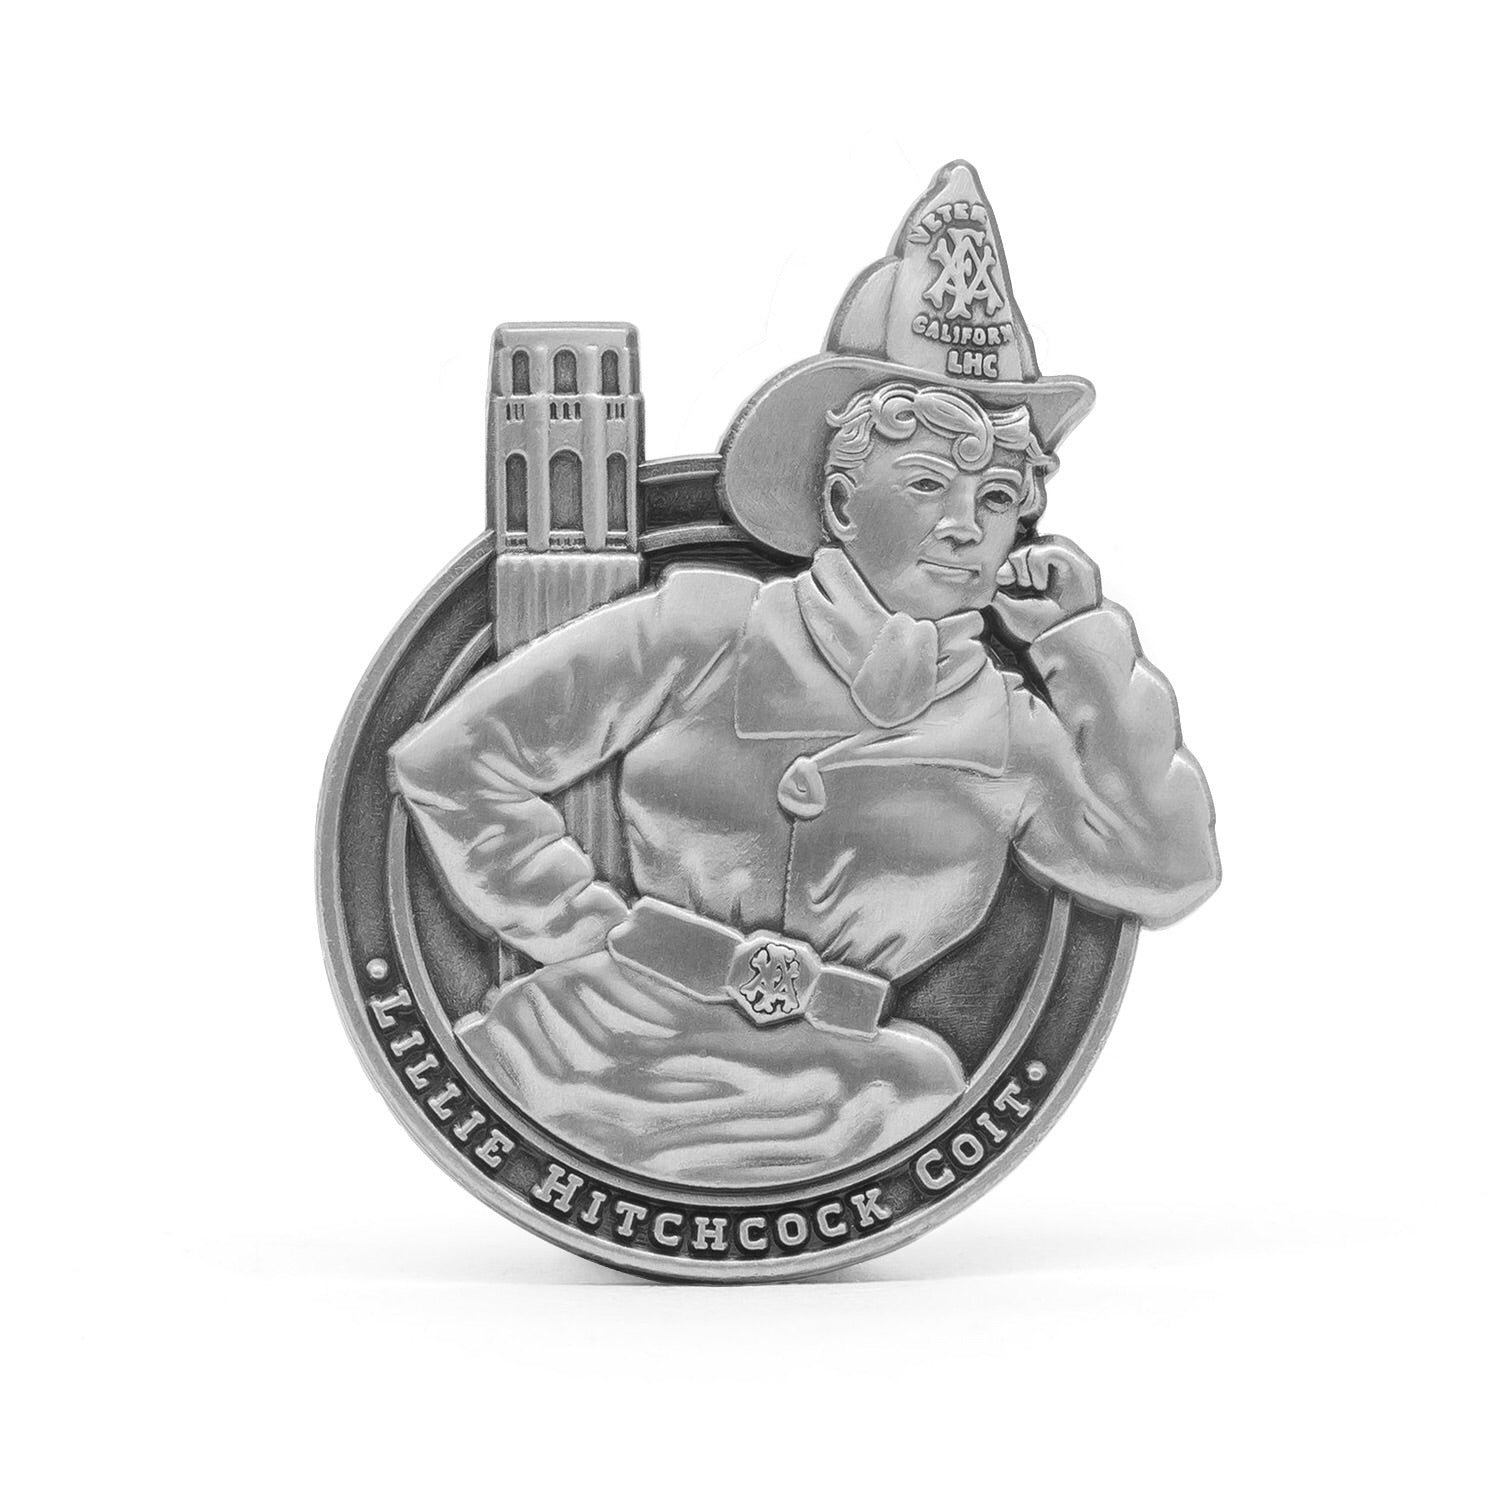 Lillie Hitchcock Coit molded pin